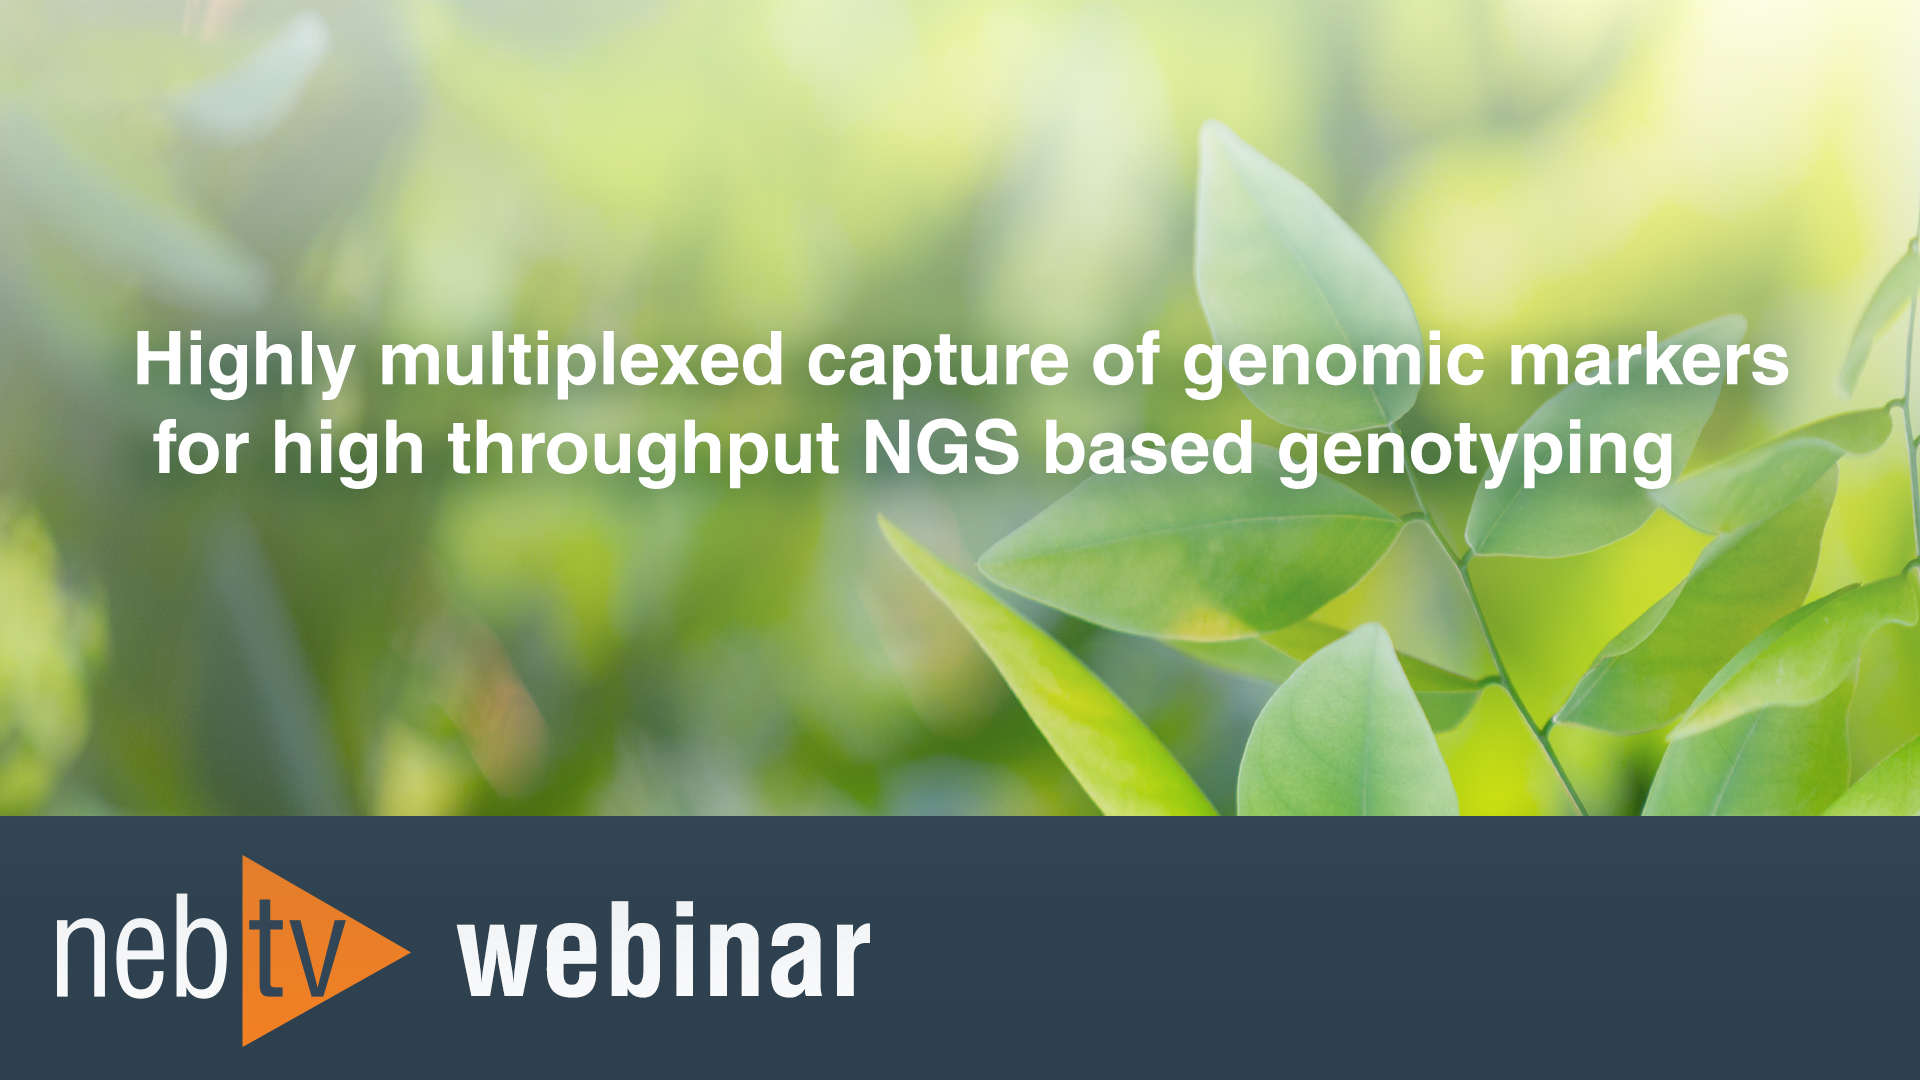 Highly multiplexed capture of genomic markers for high throughput NGS based genotyping